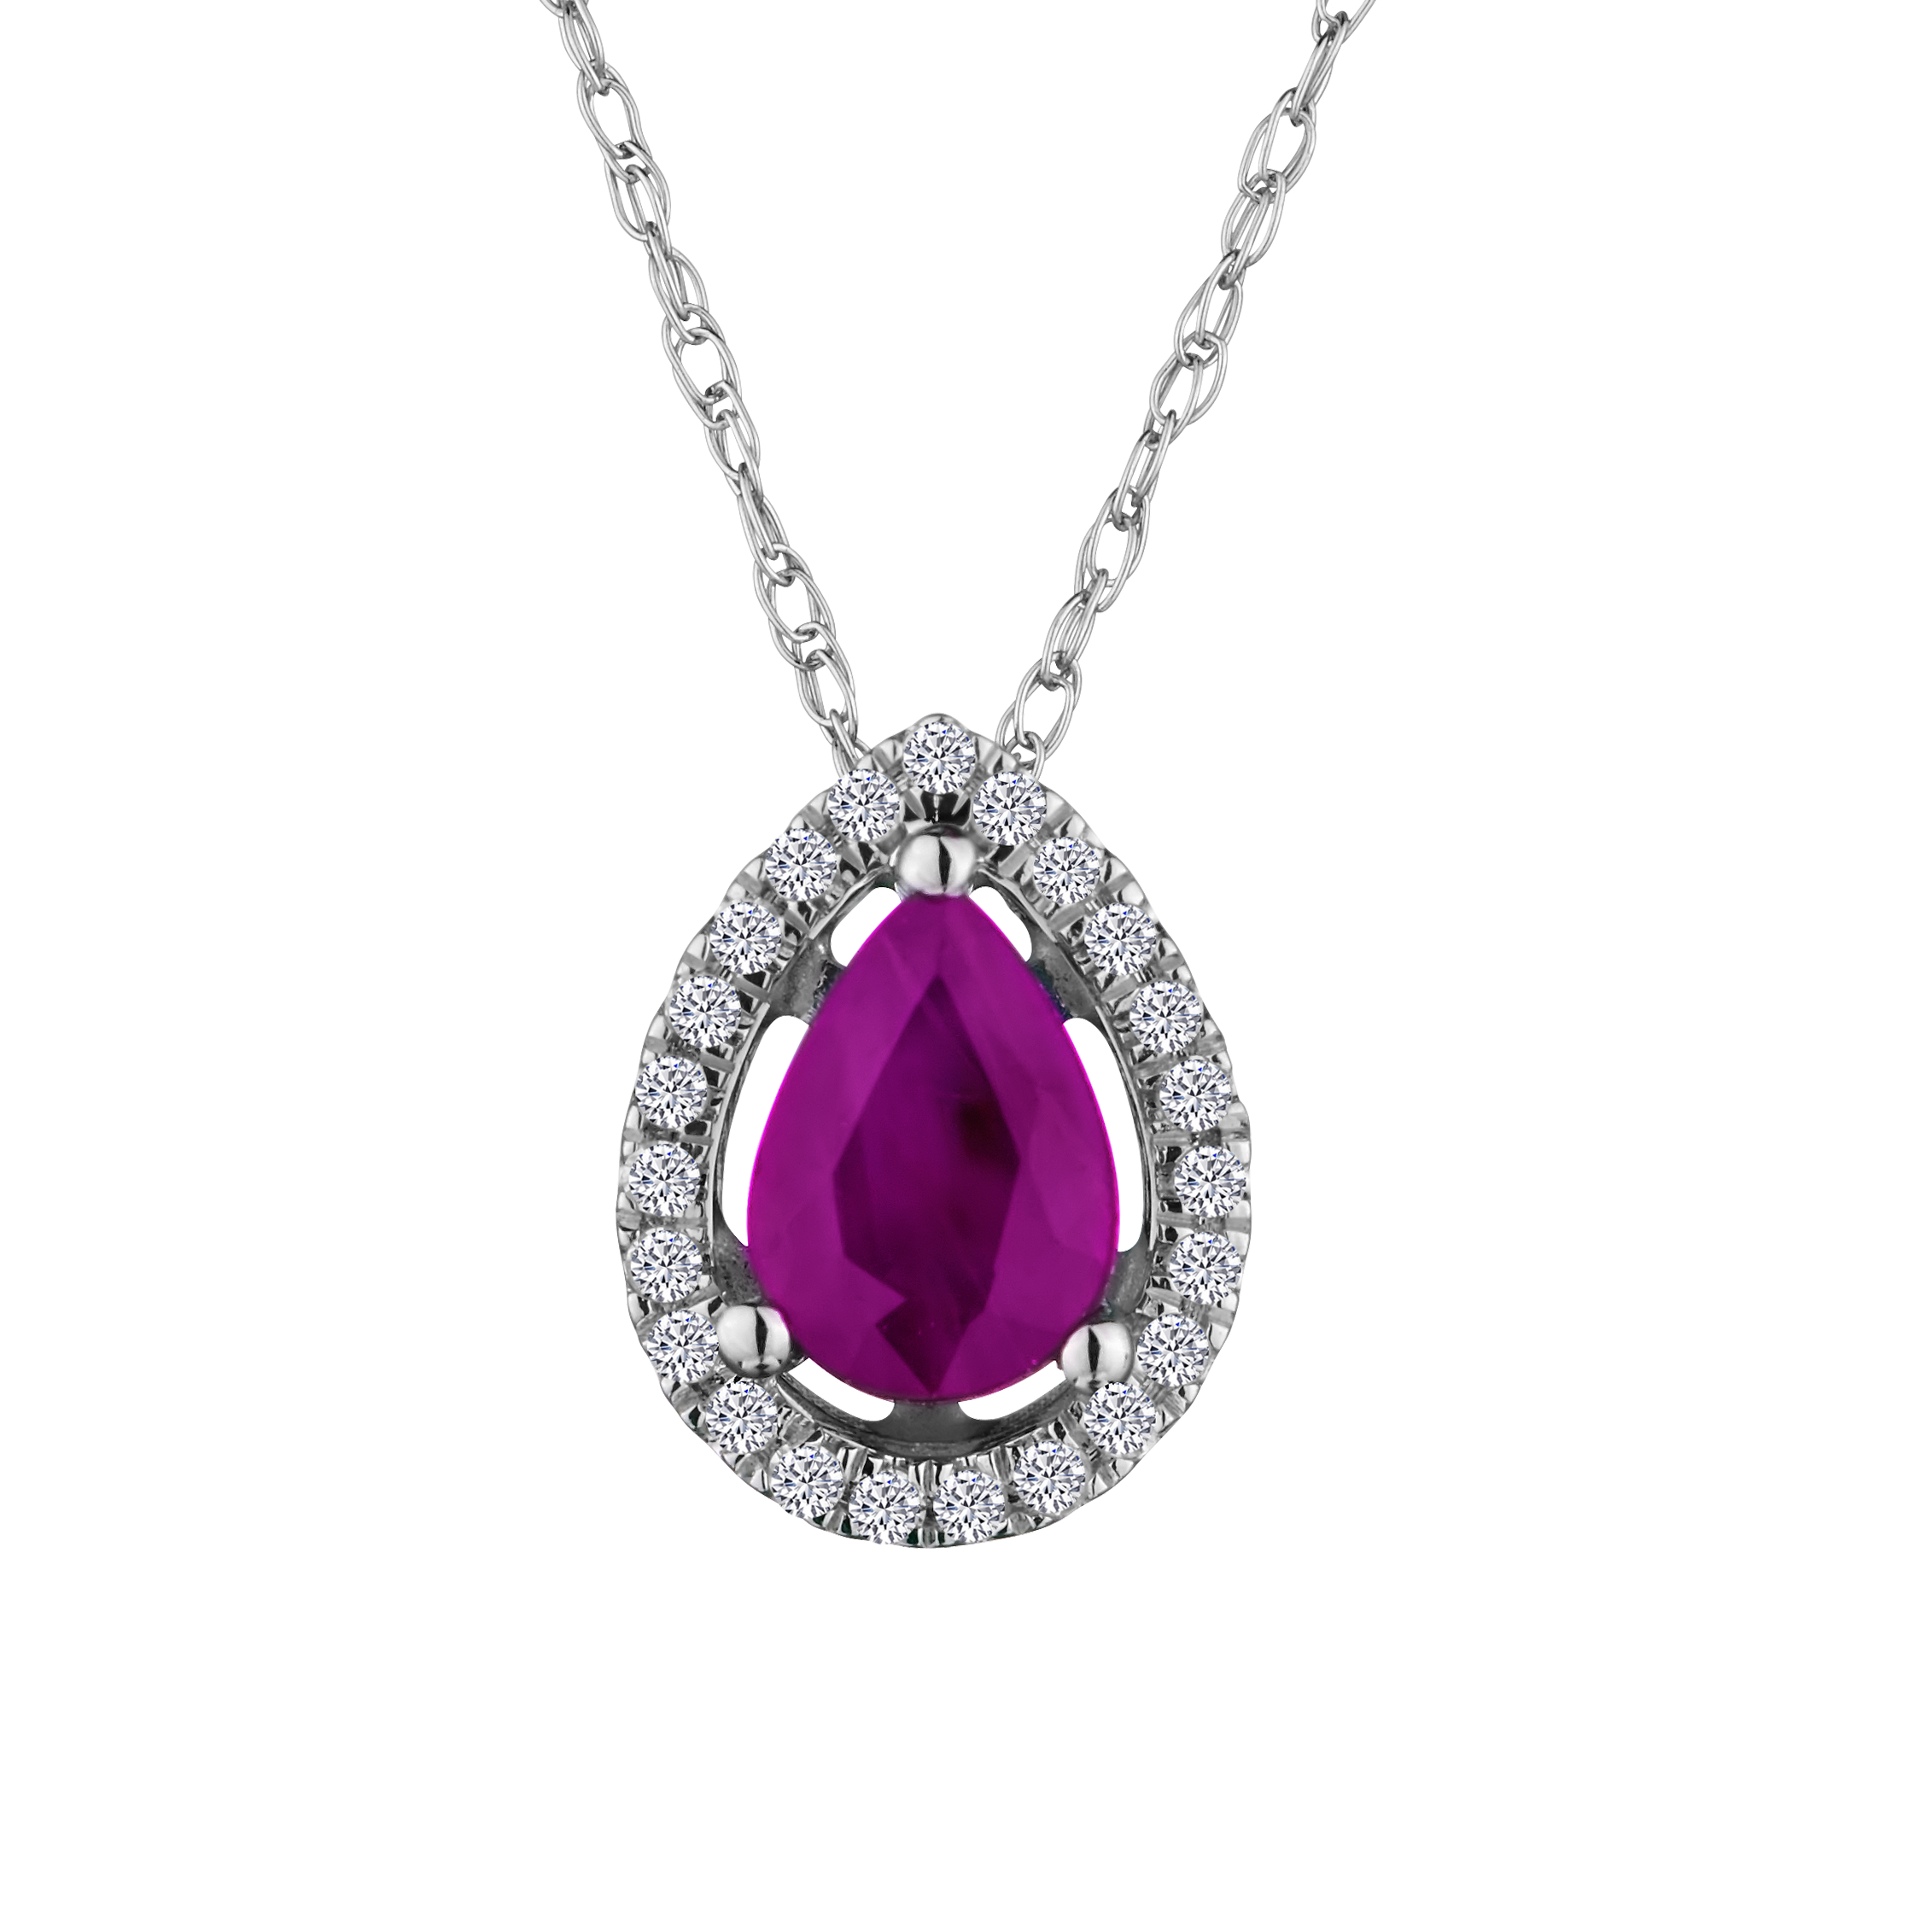 Genuine Ruby + .10 Carat Diamond Halo Pendant, 14kt White Gold. Necklaces and Pendants. Griffin Jewellery Designs. 